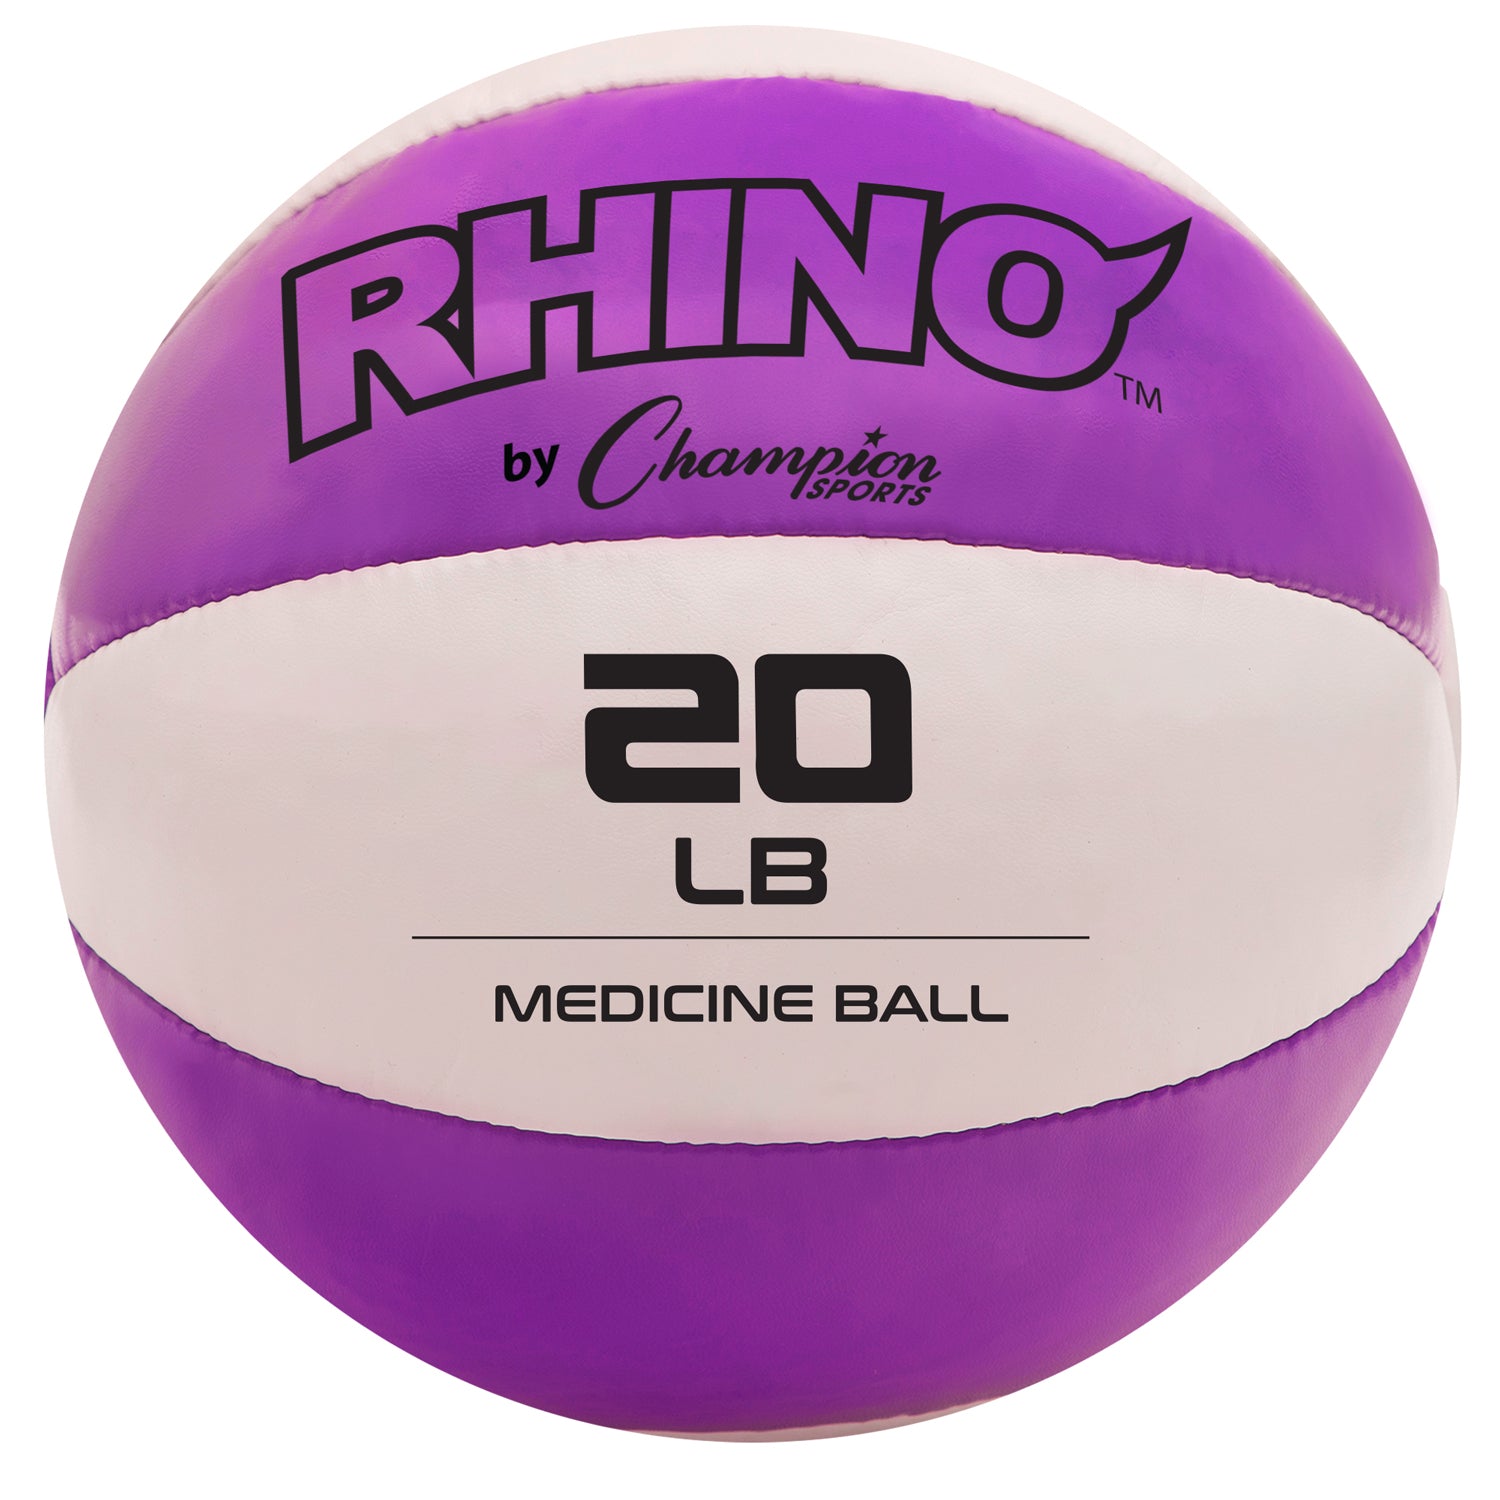 RHINO Fitness® Leather Medicine Ball Series 19-20 lb, 9 kg, 8.37"D, Purple RHINO Fitness __label:NEW! fitness indoor medicine ball physical therapy